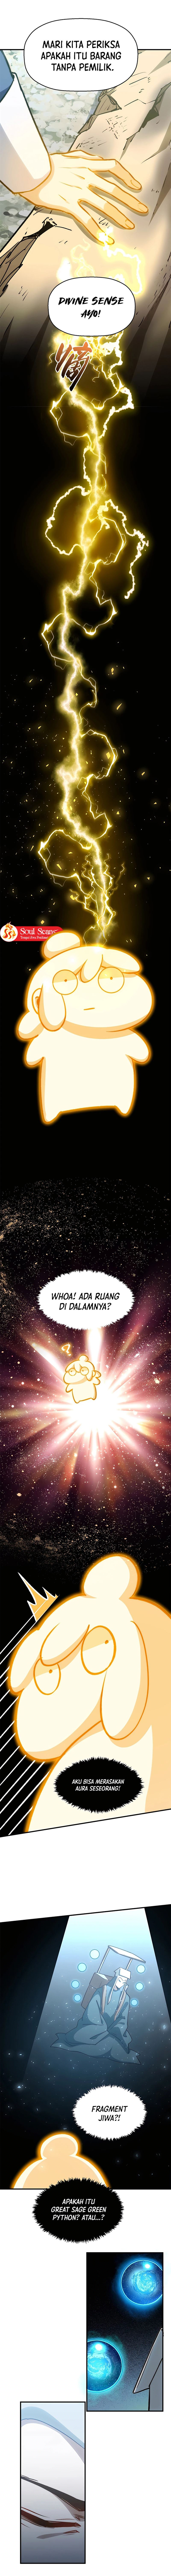 Dilarang COPAS - situs resmi www.mangacanblog.com - Komik top tier providence secretly cultivate for a thousand years 112 - chapter 112 113 Indonesia top tier providence secretly cultivate for a thousand years 112 - chapter 112 Terbaru 8|Baca Manga Komik Indonesia|Mangacan